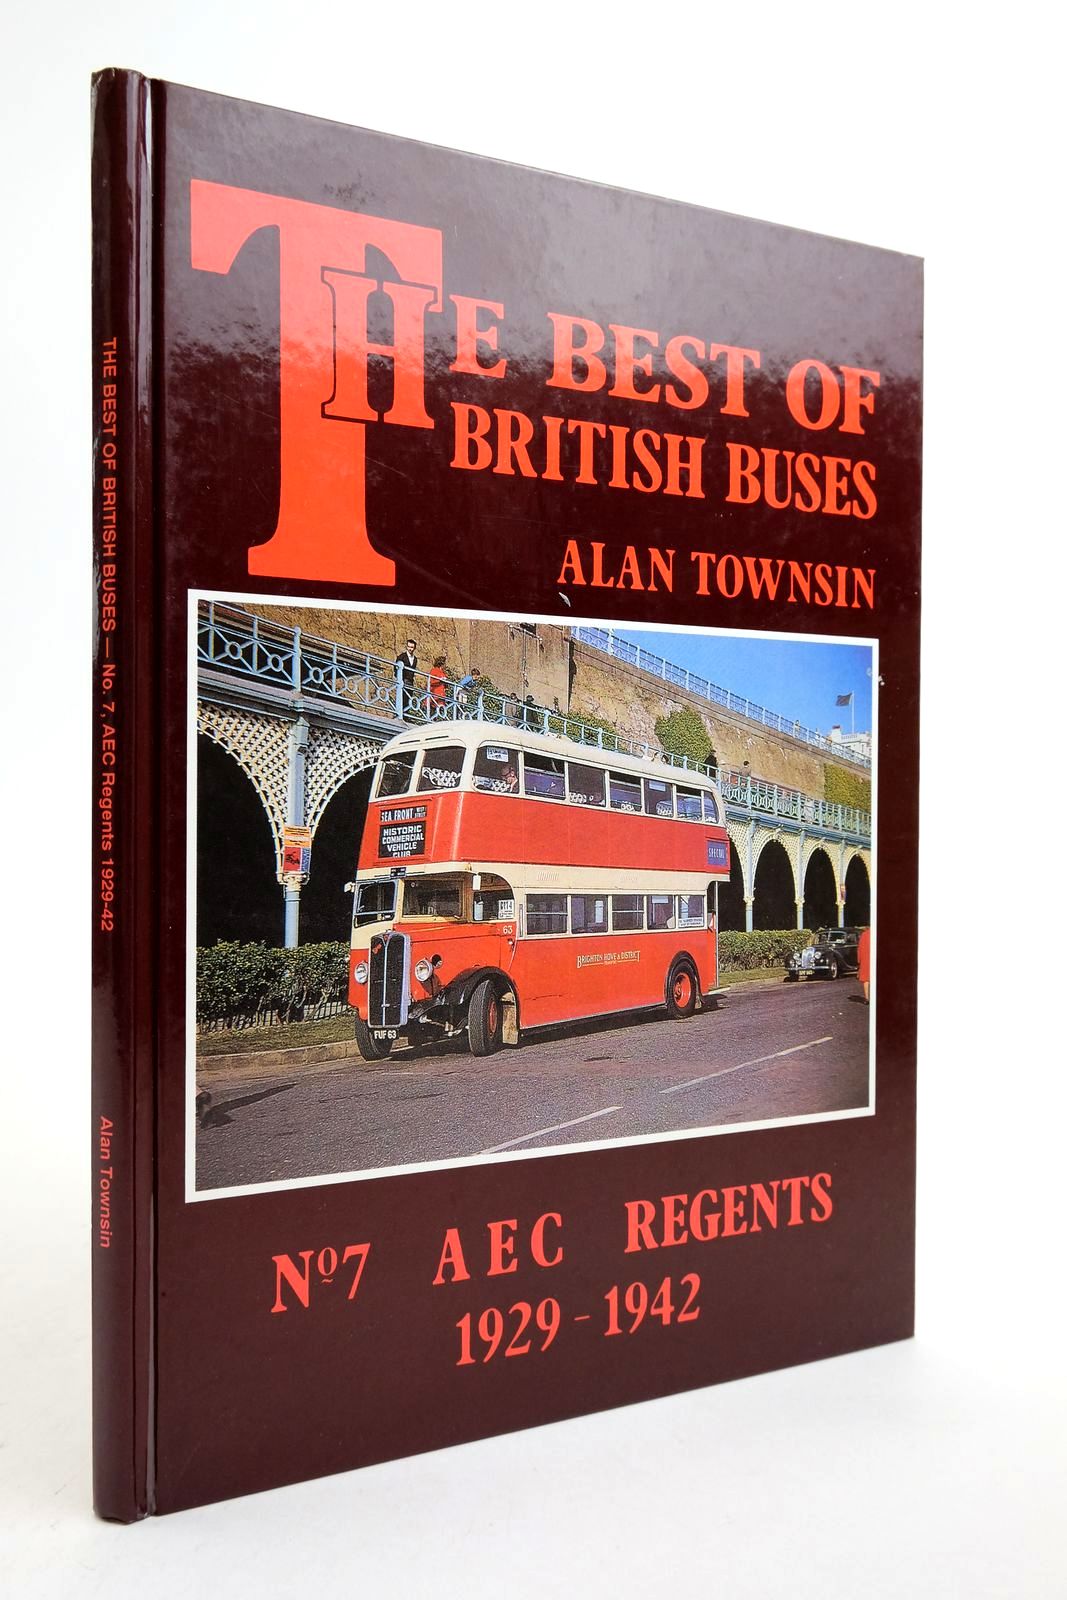 Photo of THE BEST OF BRITISH BUSES No. 7 AEC REGENTS 1929-1942 written by Townsin, Alan published by Booklaw Railbus (STOCK CODE: 2139659)  for sale by Stella & Rose's Books